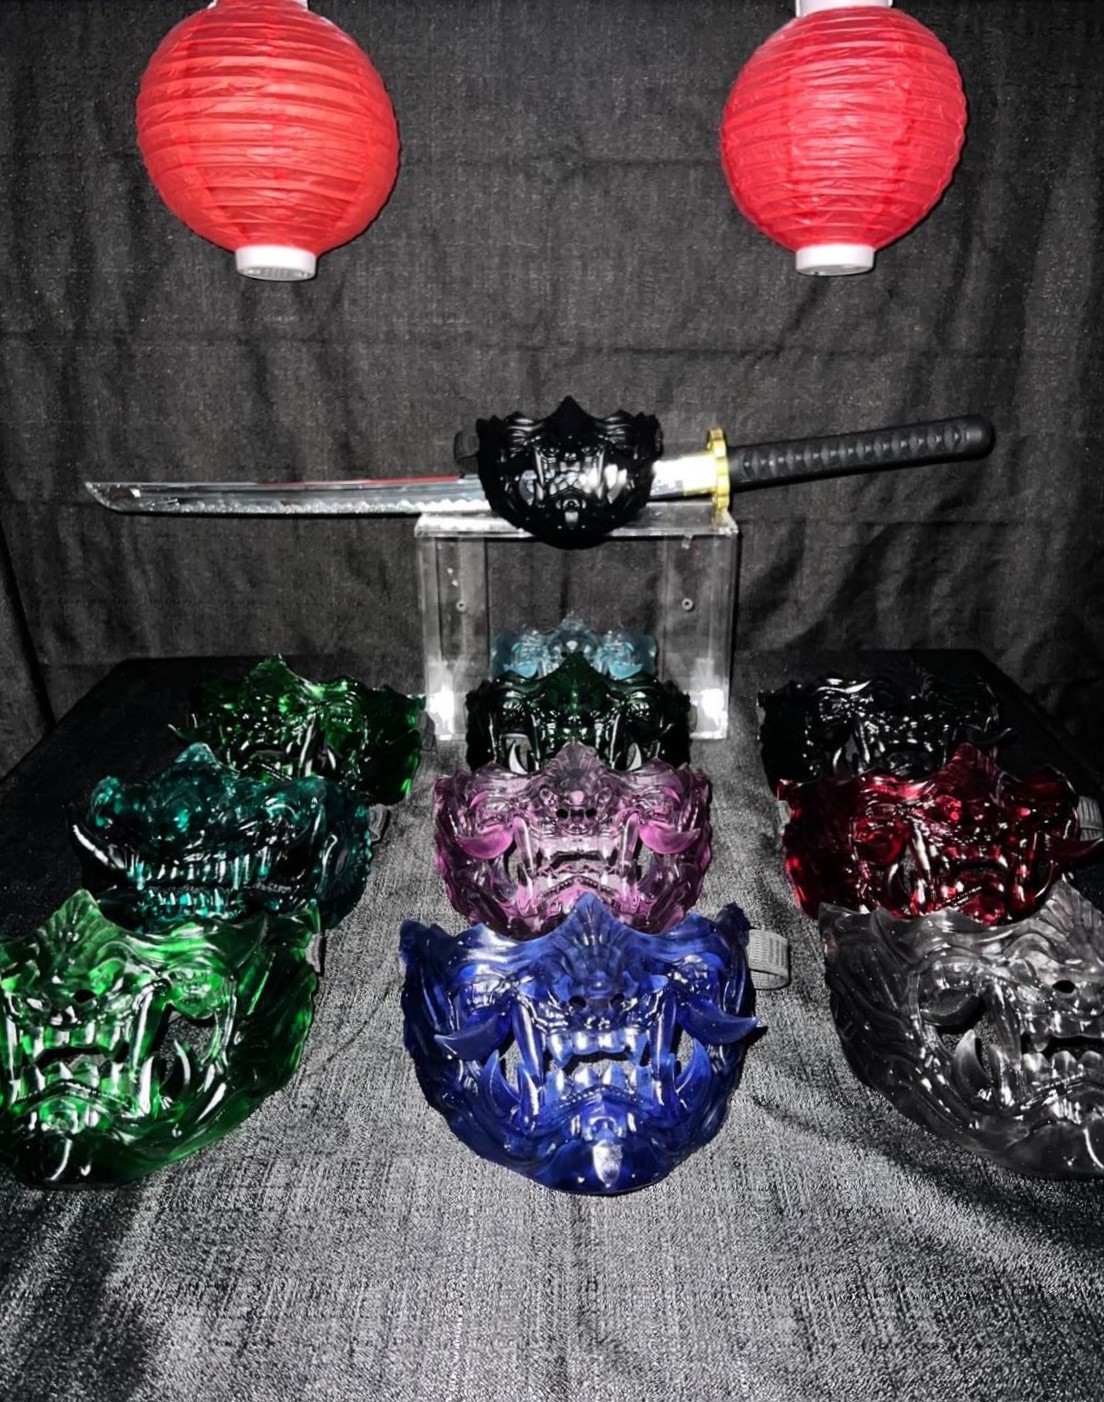 Mask Display 1 by Onibros on DeviantArt